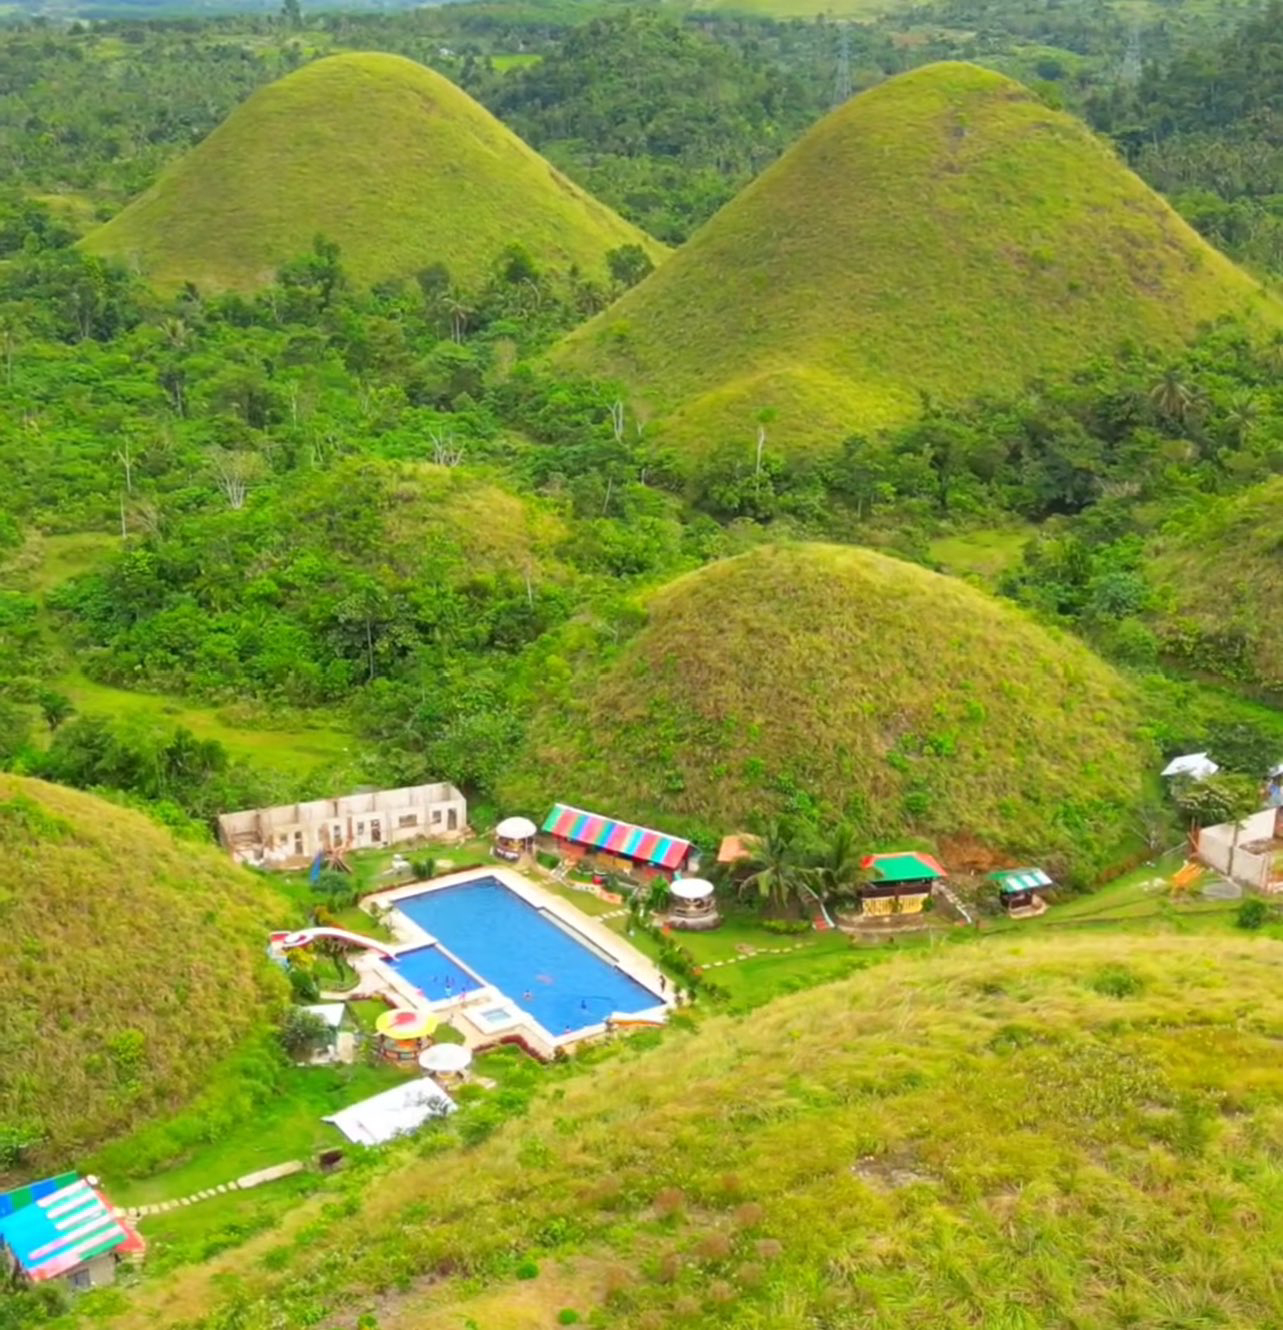 VIDEO DENR built swimming pool resort in the middle of